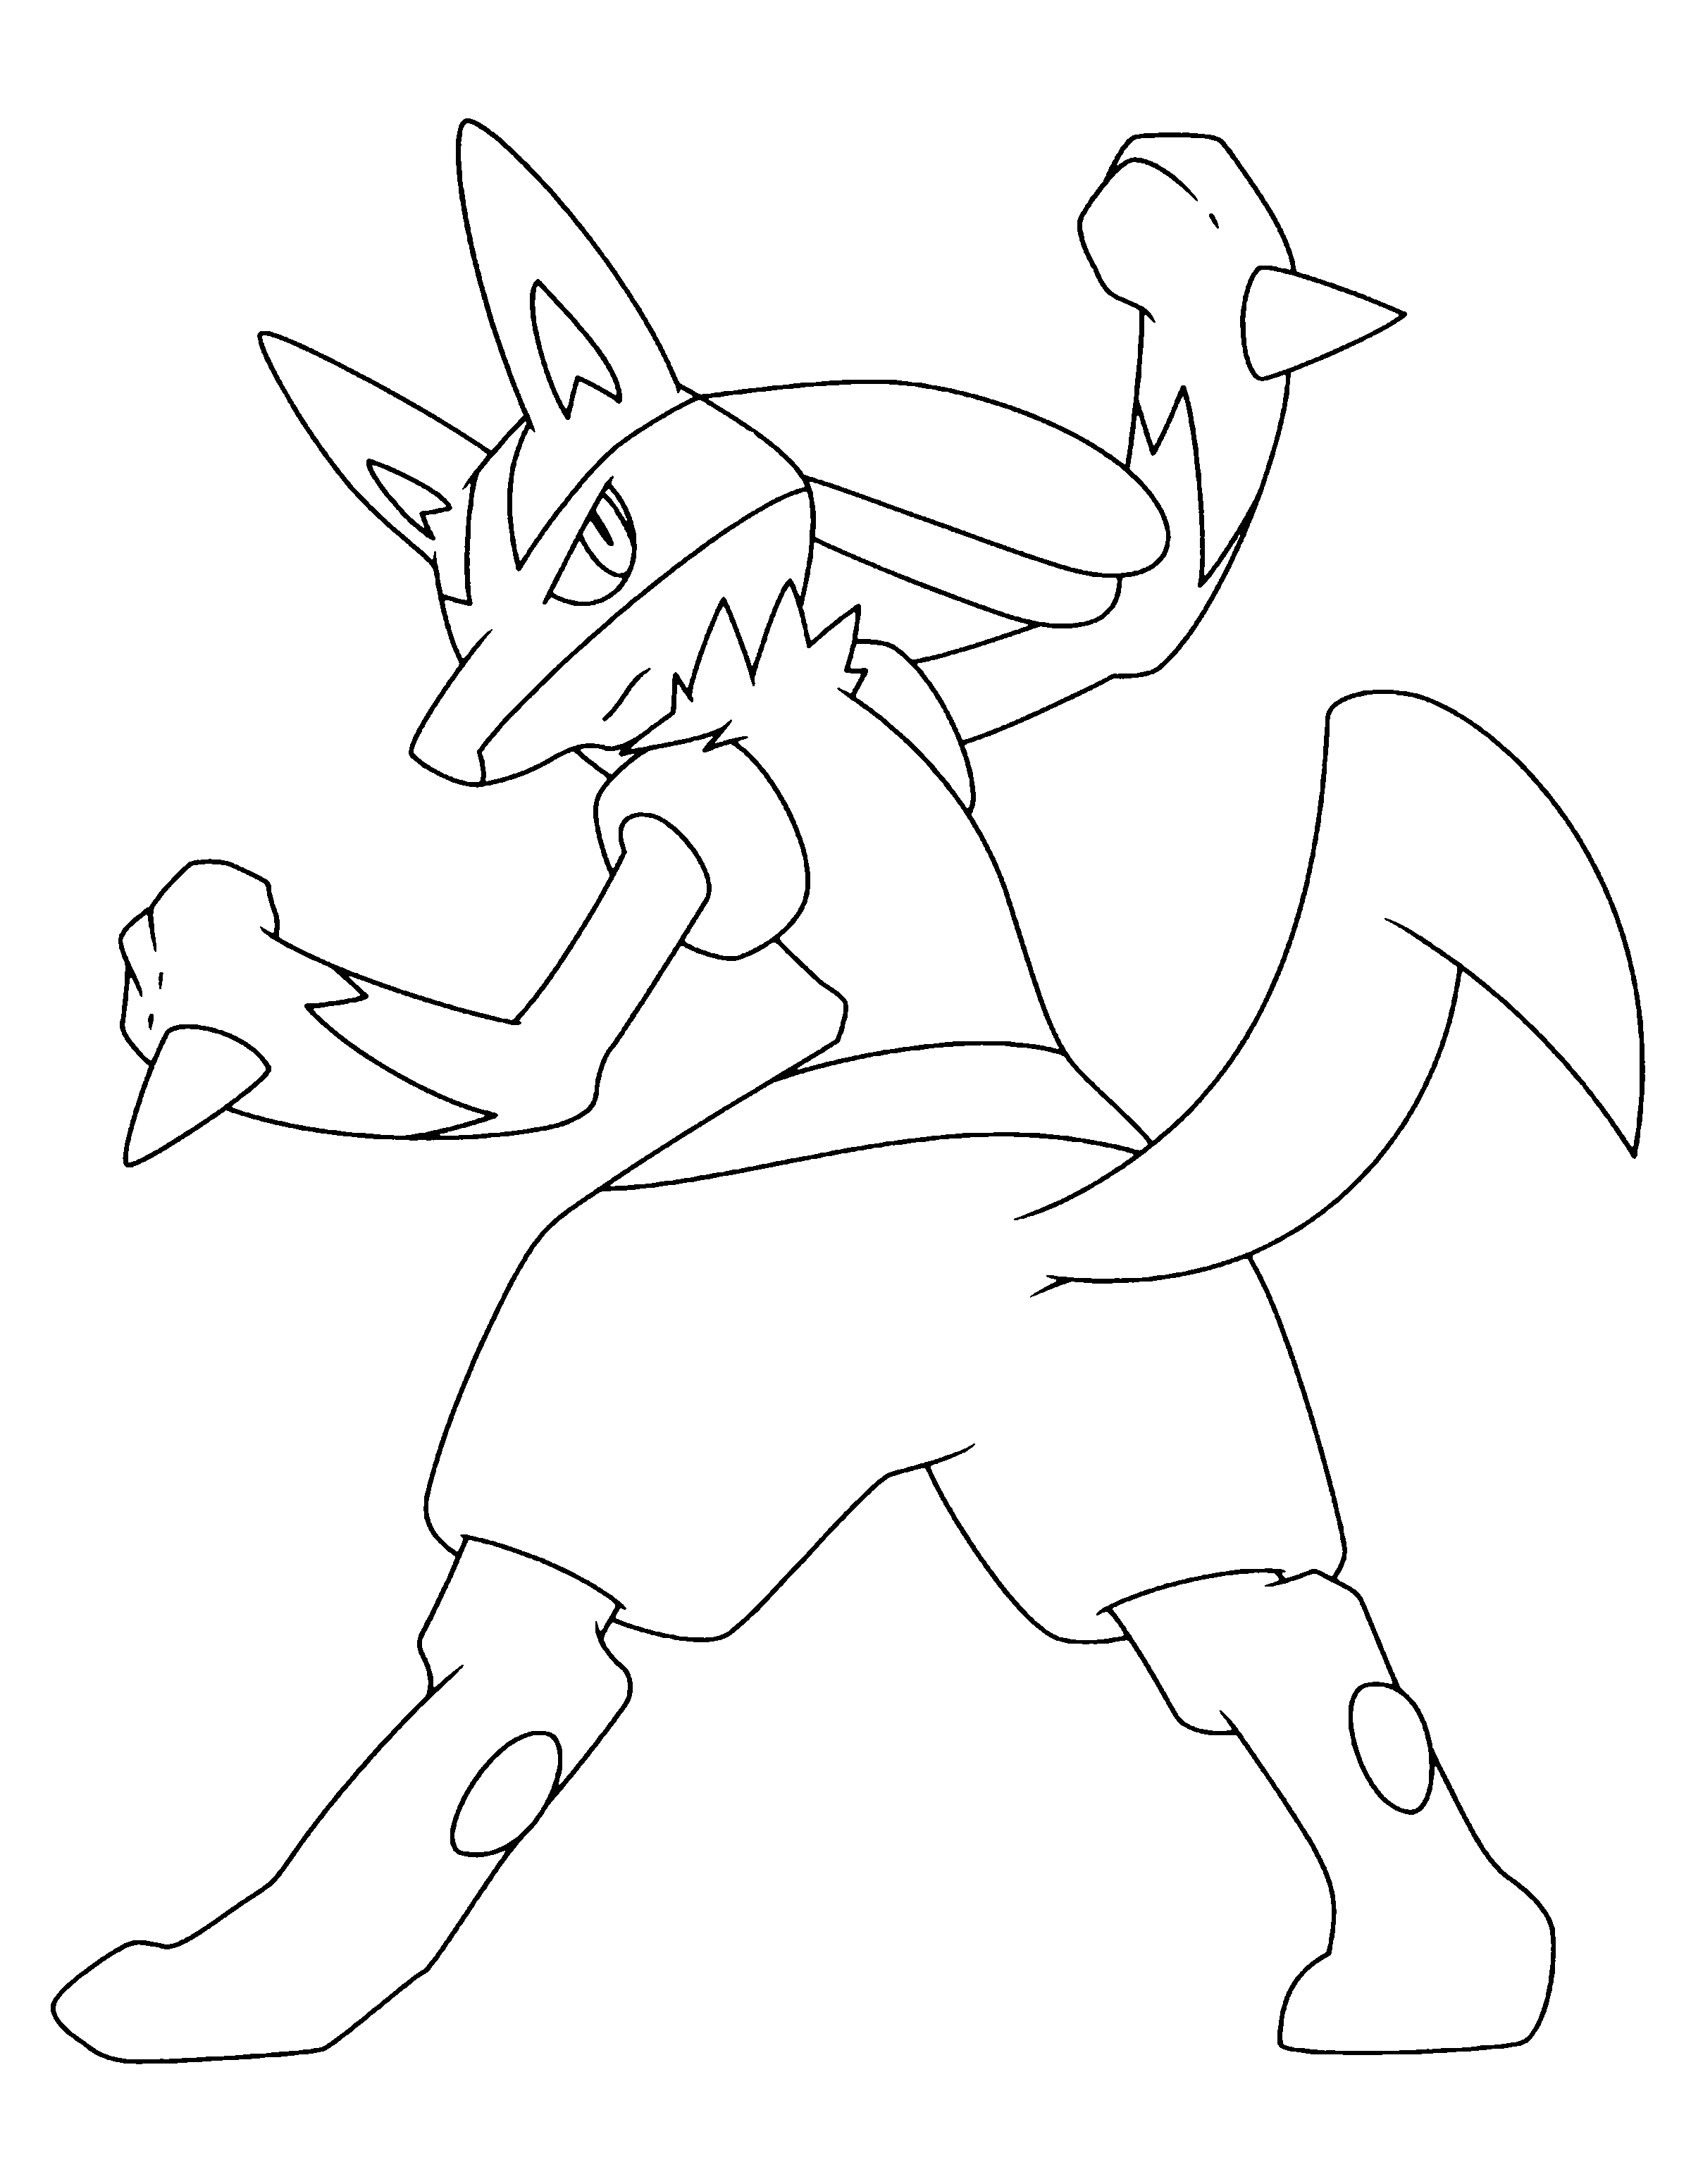 animated-coloring-pages-pokemon-image-0561